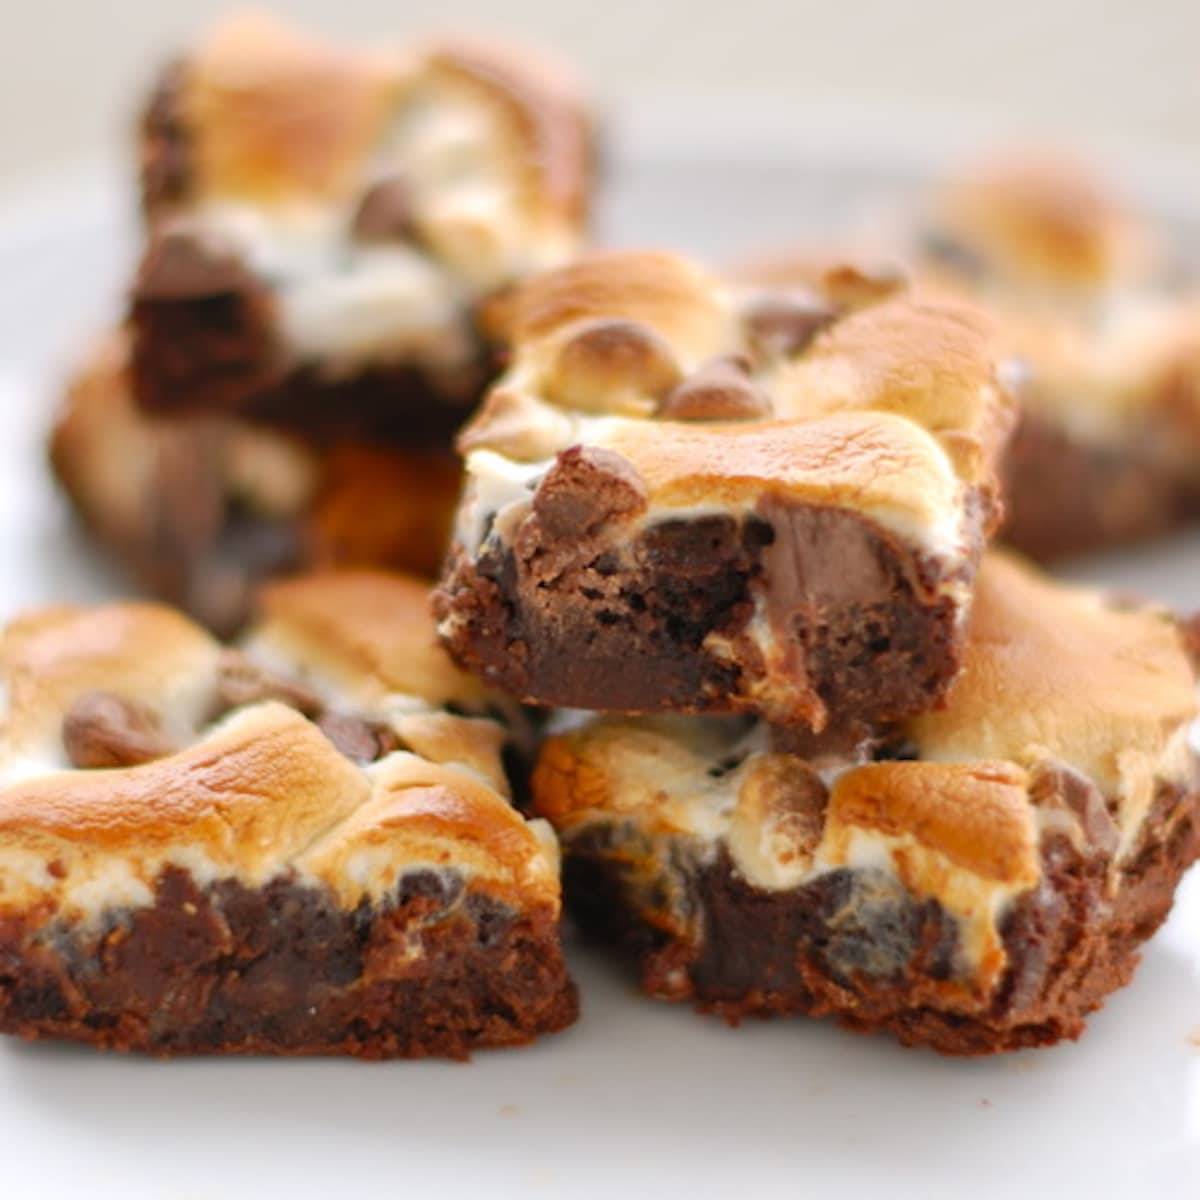 Rocky road brownies with toasted marshmallows on top.